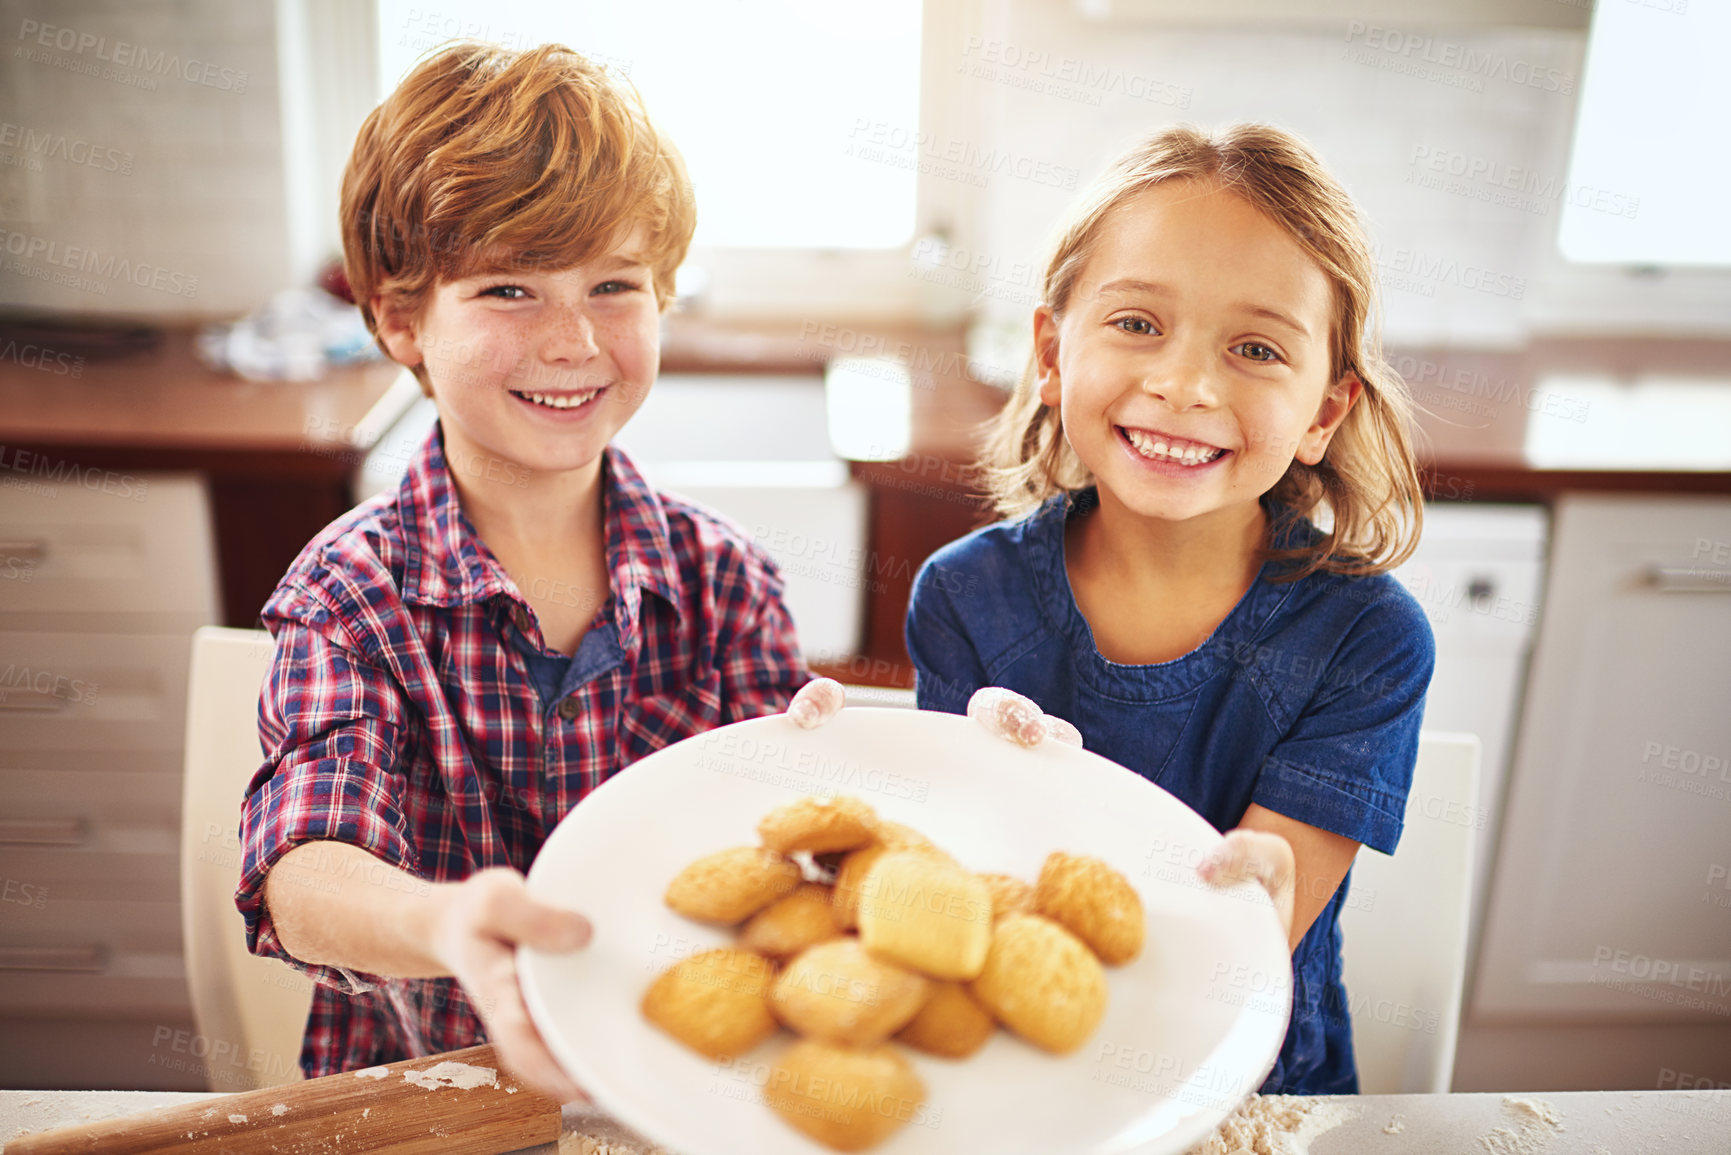 Buy stock photo Portrait of two young children holding a plate of biscuits together